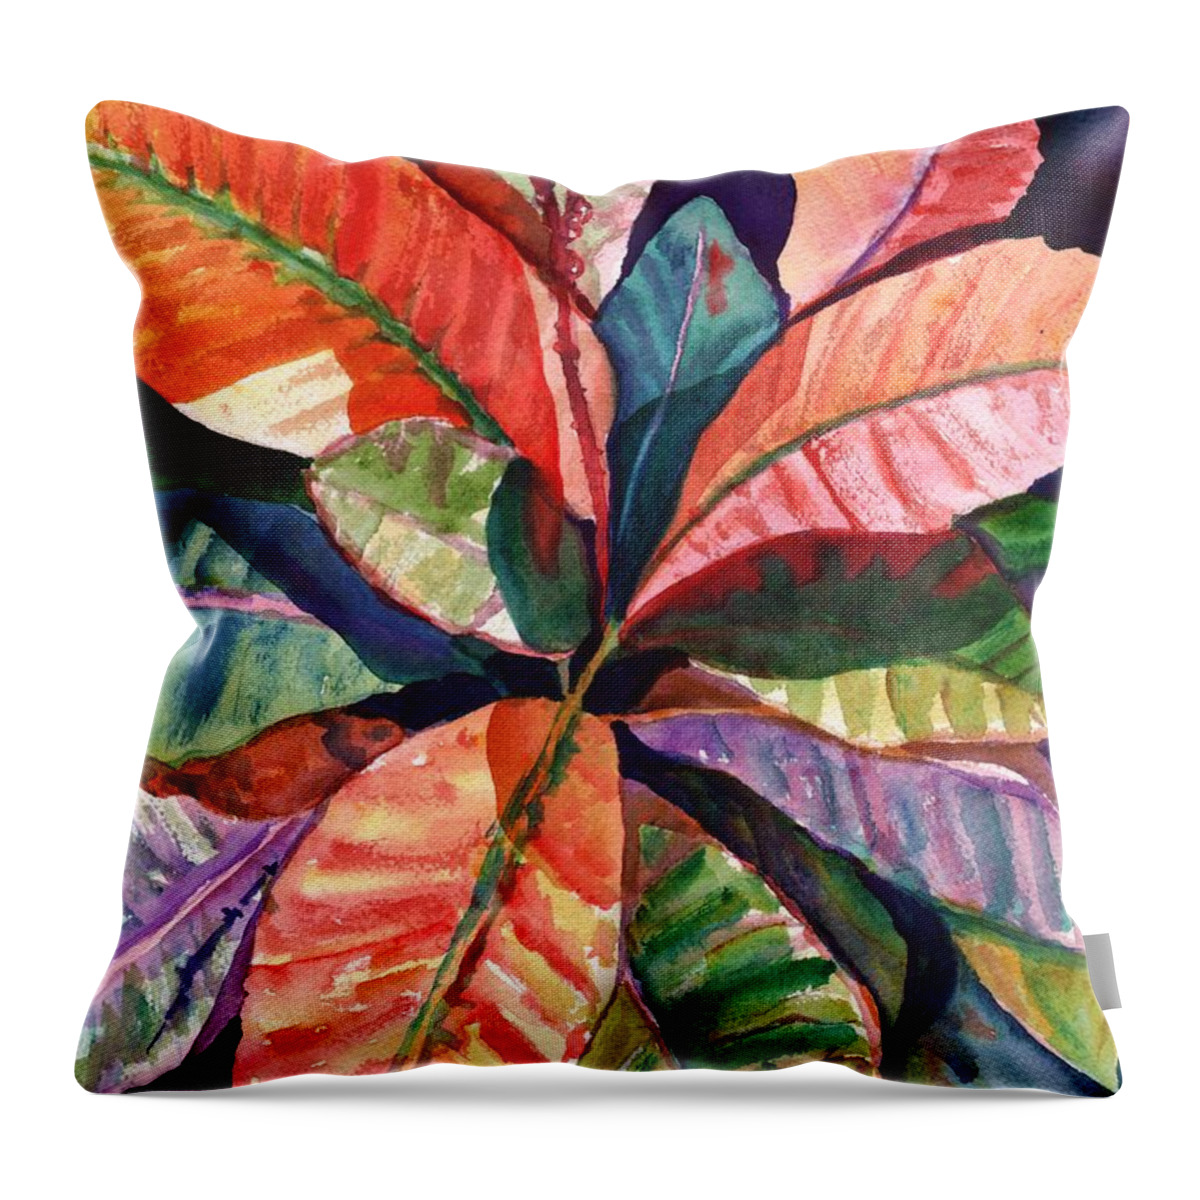 Tropical Leaves Throw Pillow featuring the painting Colorful Tropical Leaves 1 by Marionette Taboniar